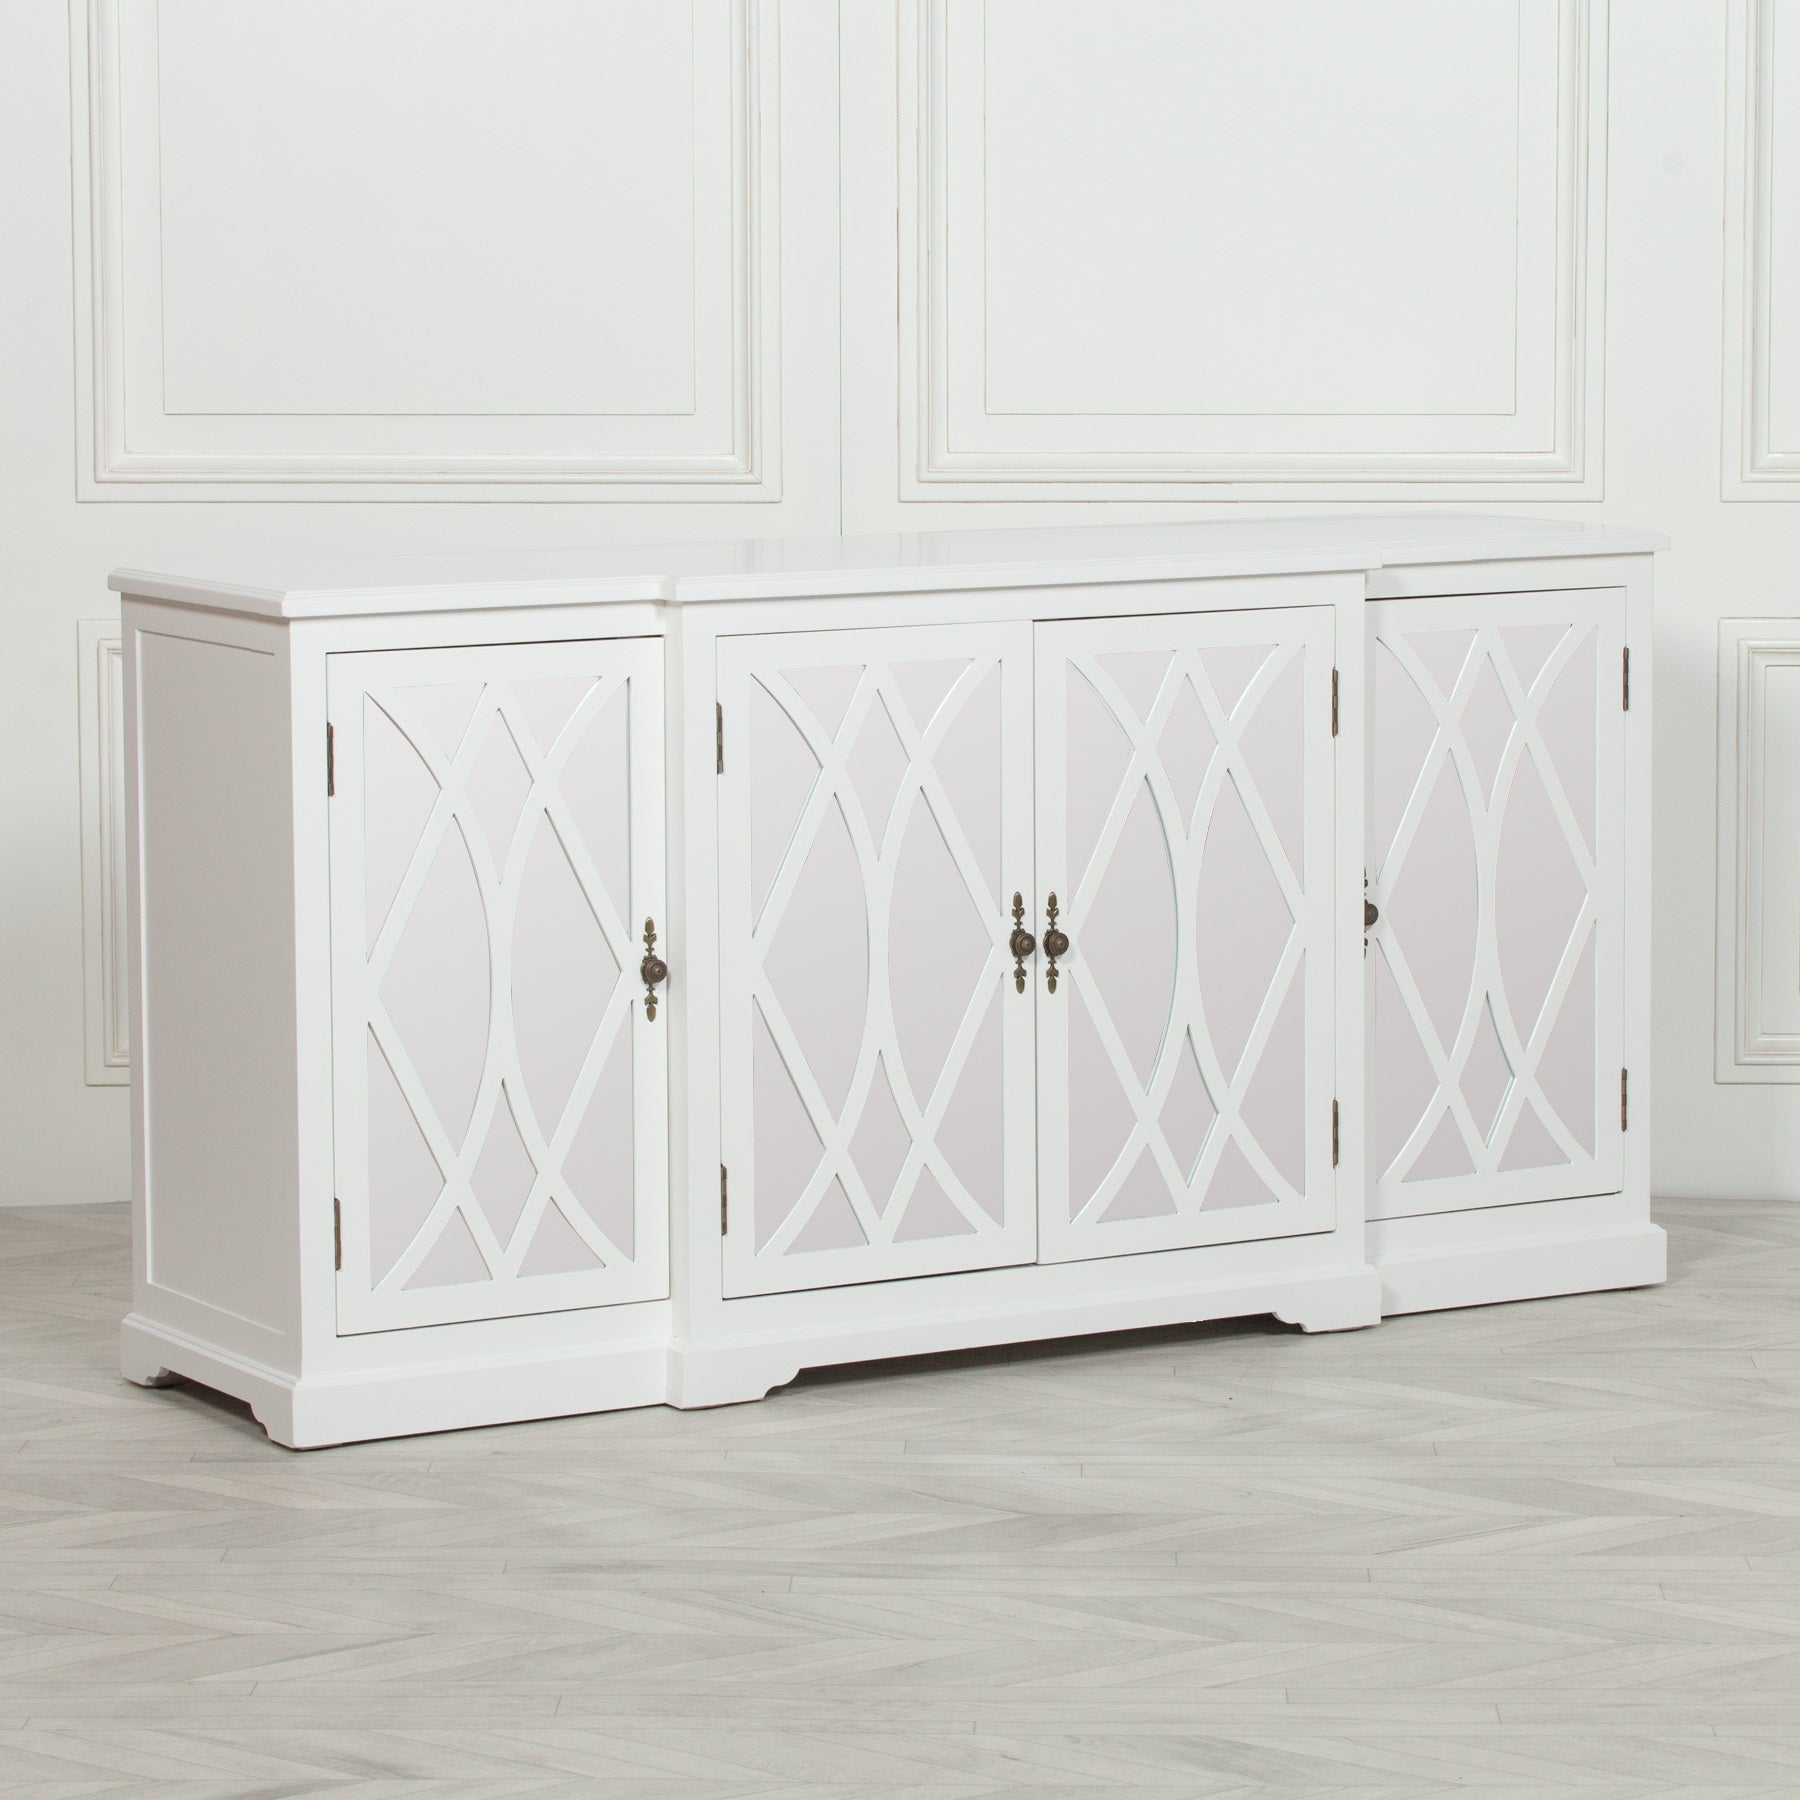 Breakfont White Mirror Front Sideboard